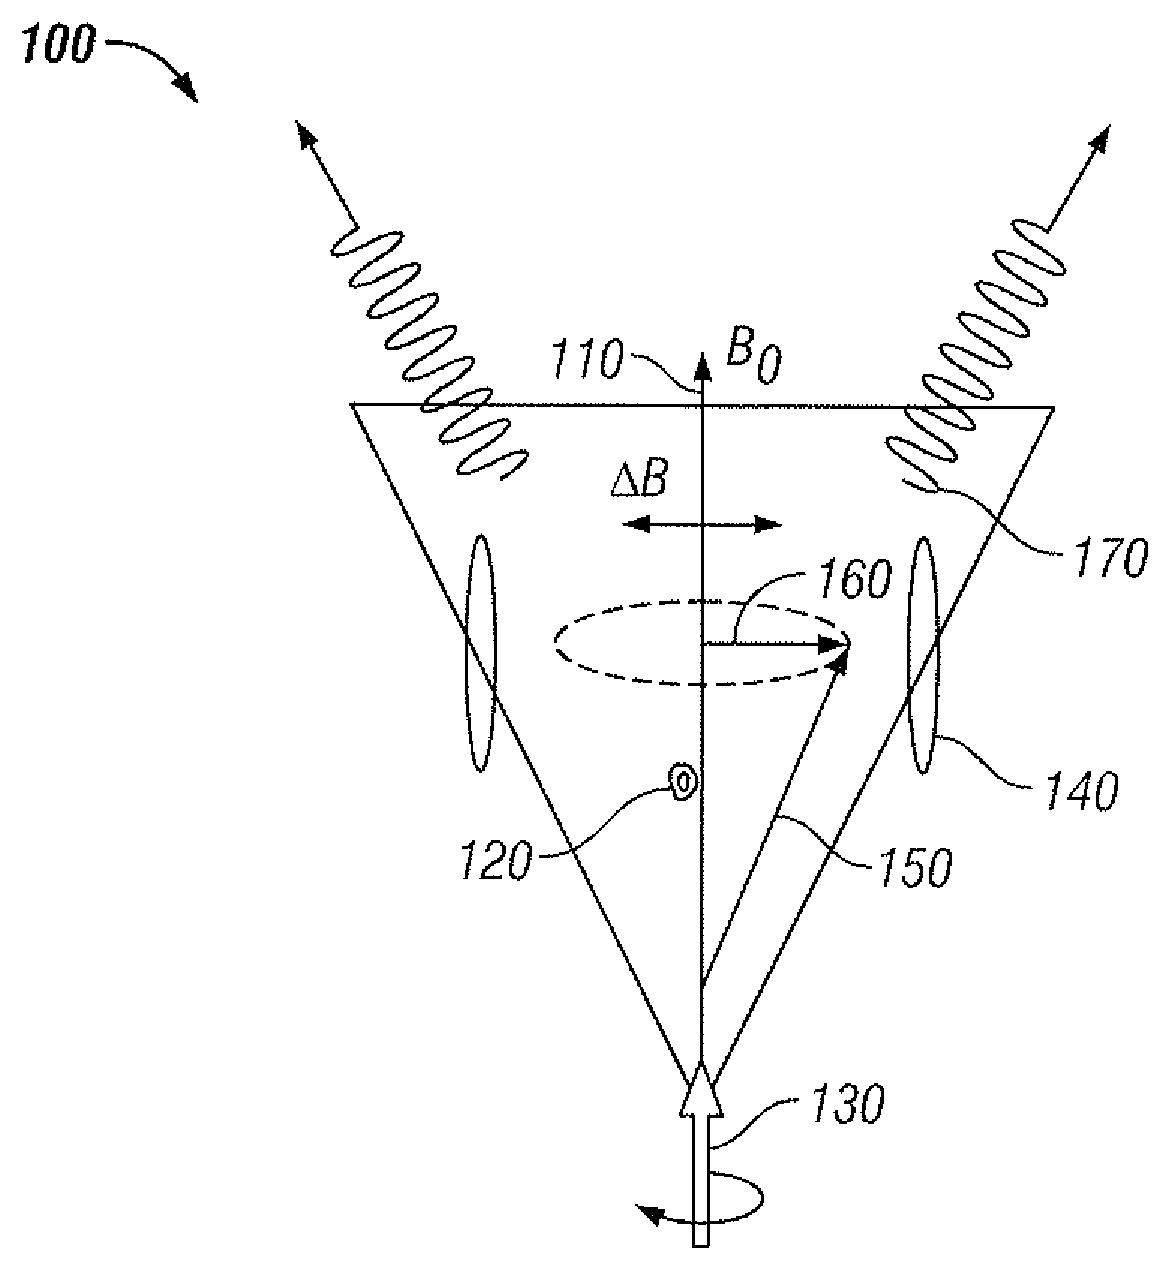 Compact atomic magnetometer and gyroscope based on a diverging laser beam